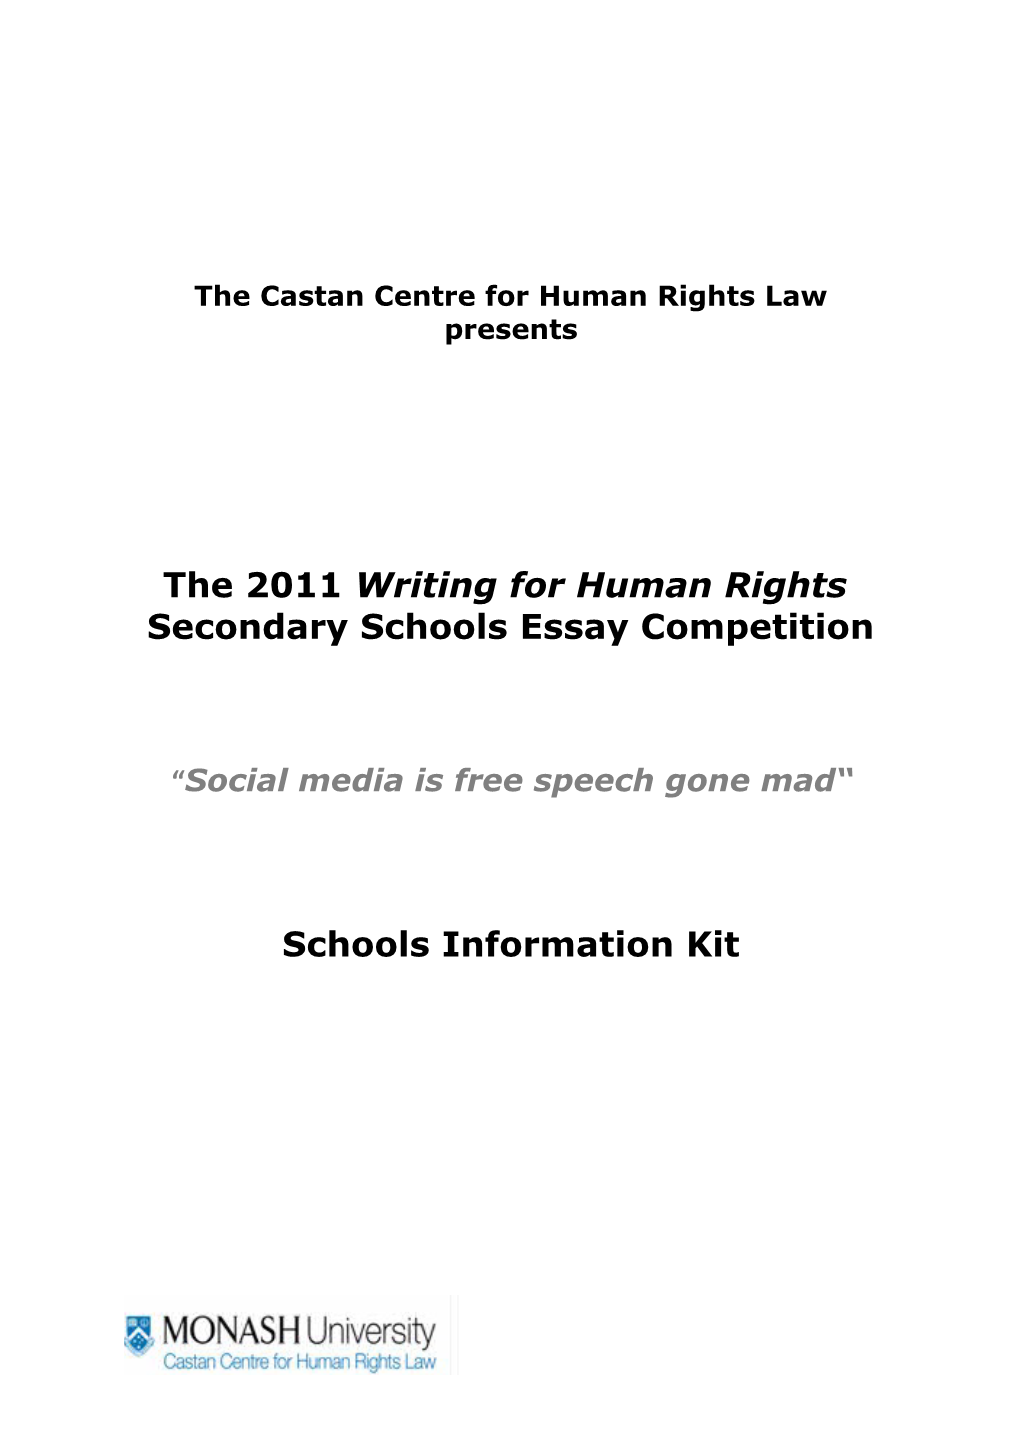 The Castan Centre for Human Rights Law Presents